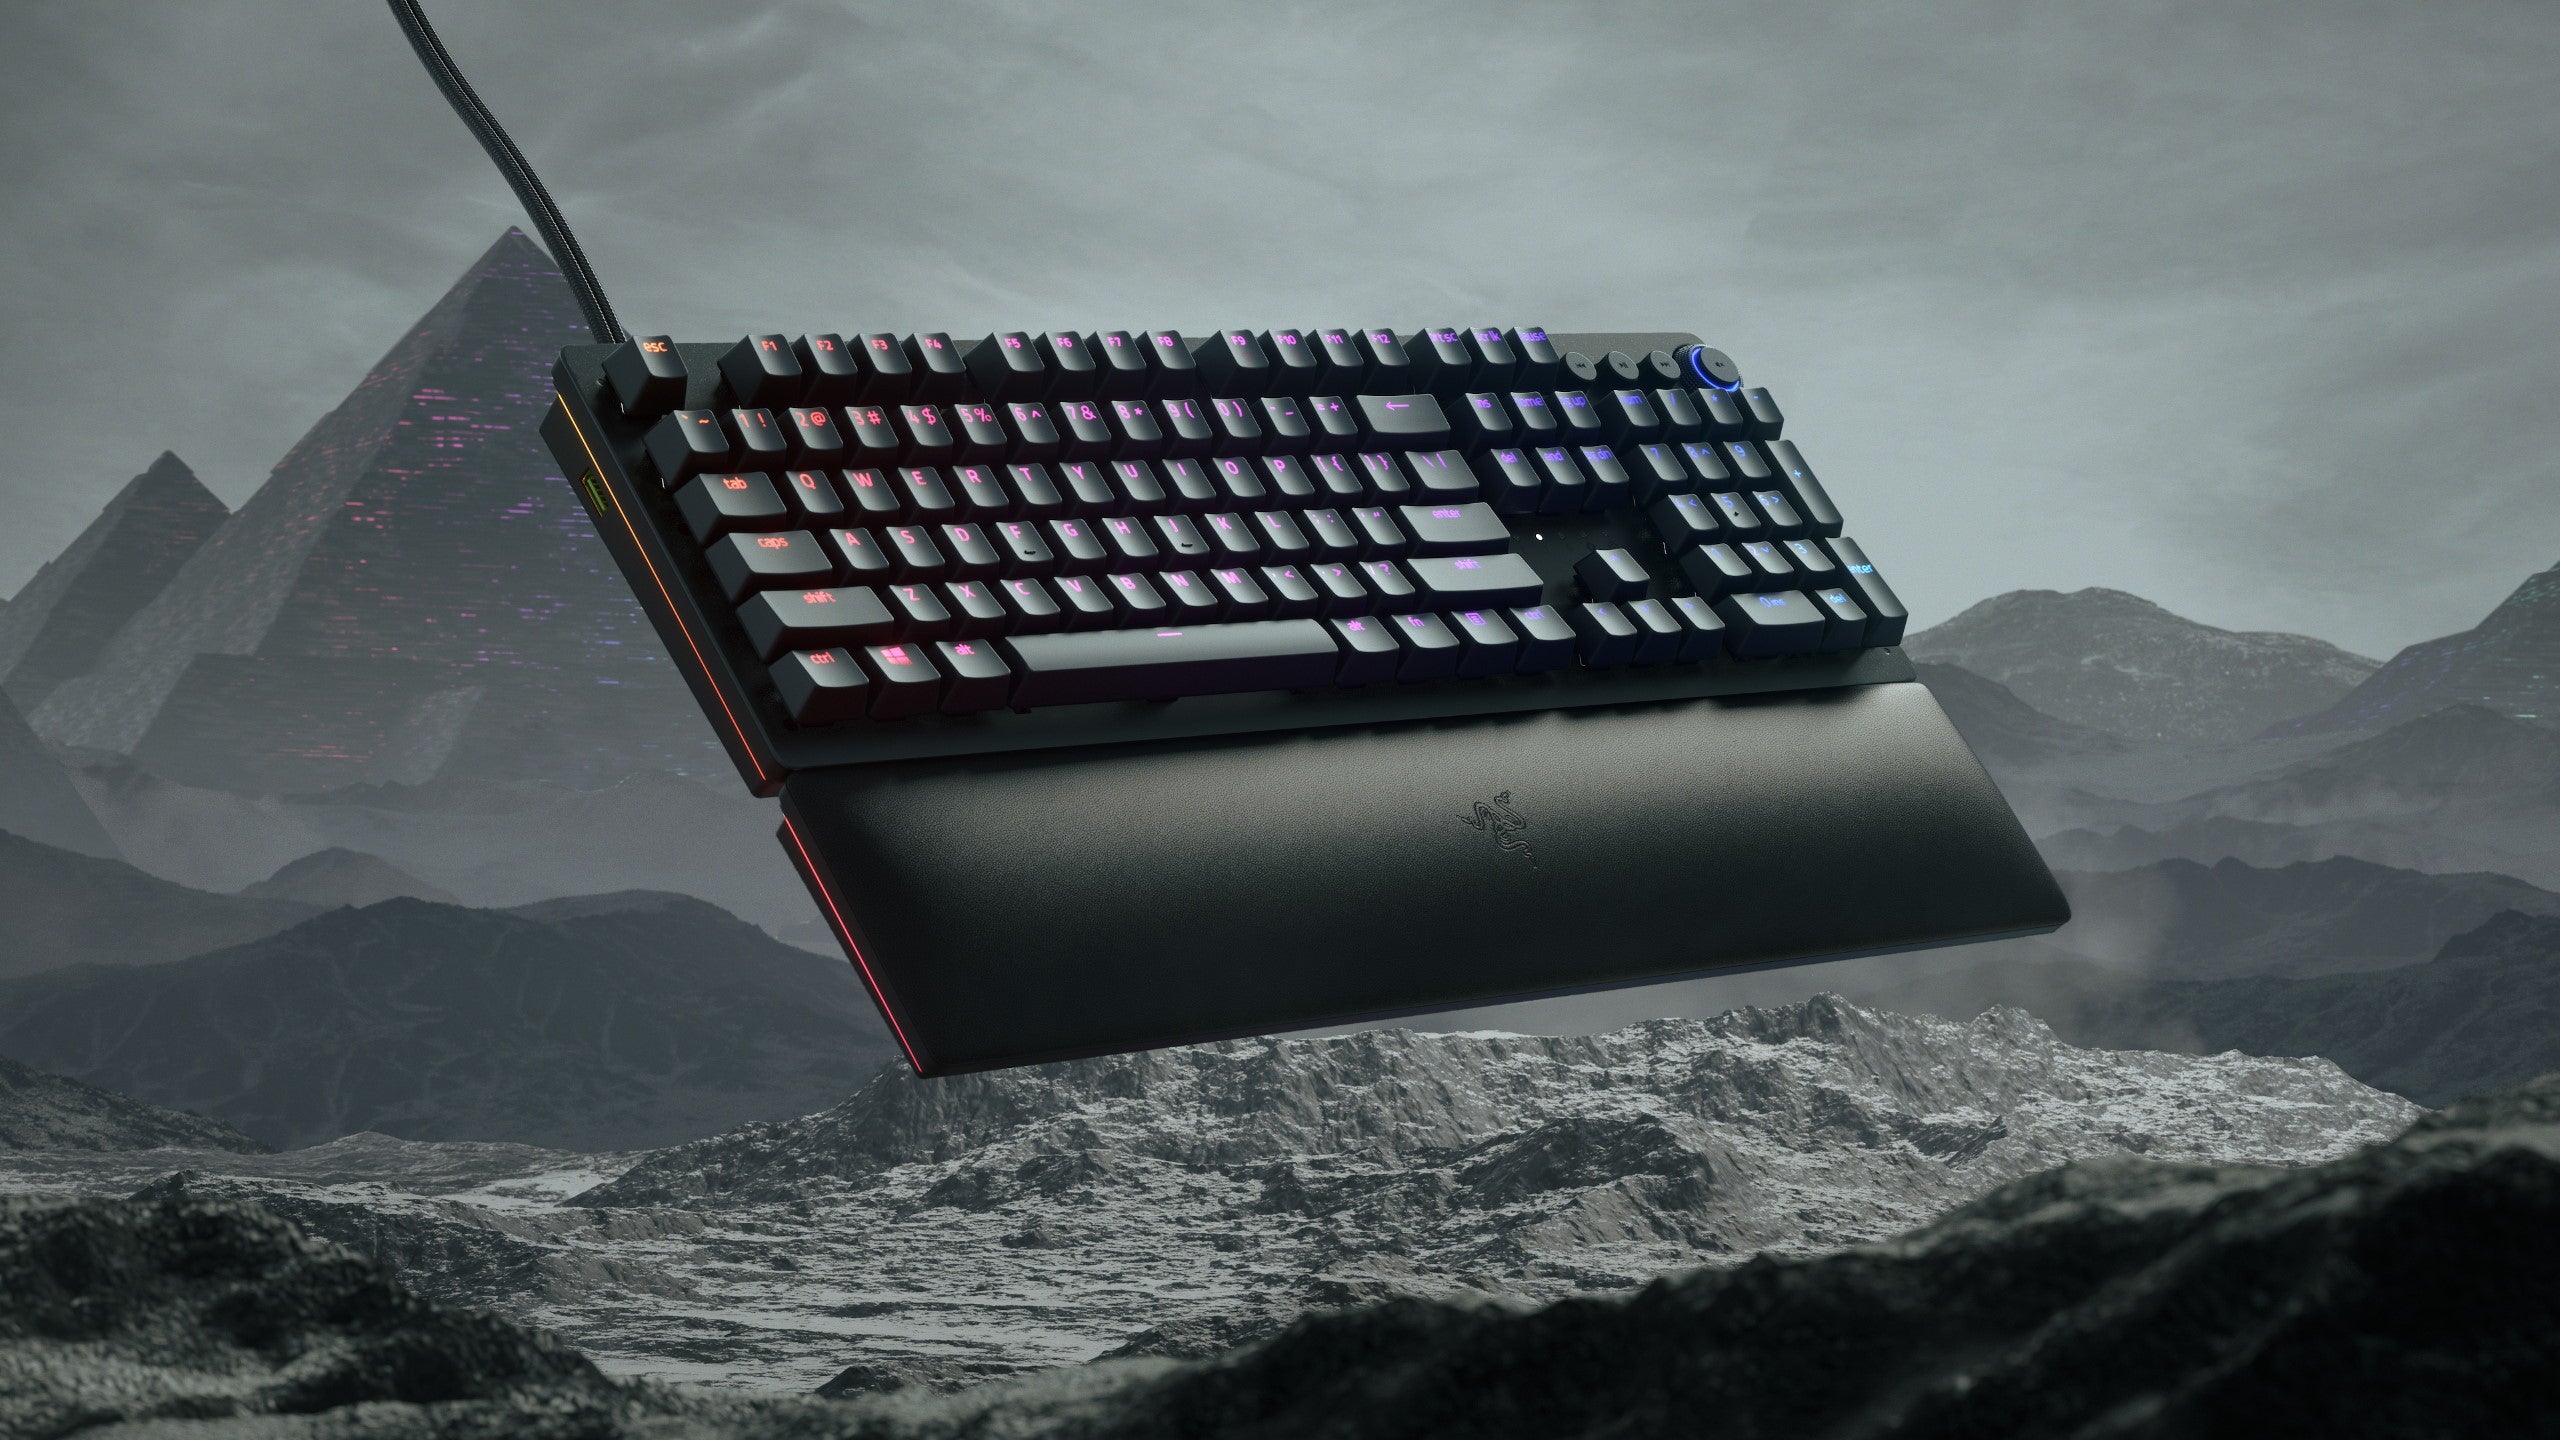 Razer has become fully analog with its new Huntsman V2 keyboard